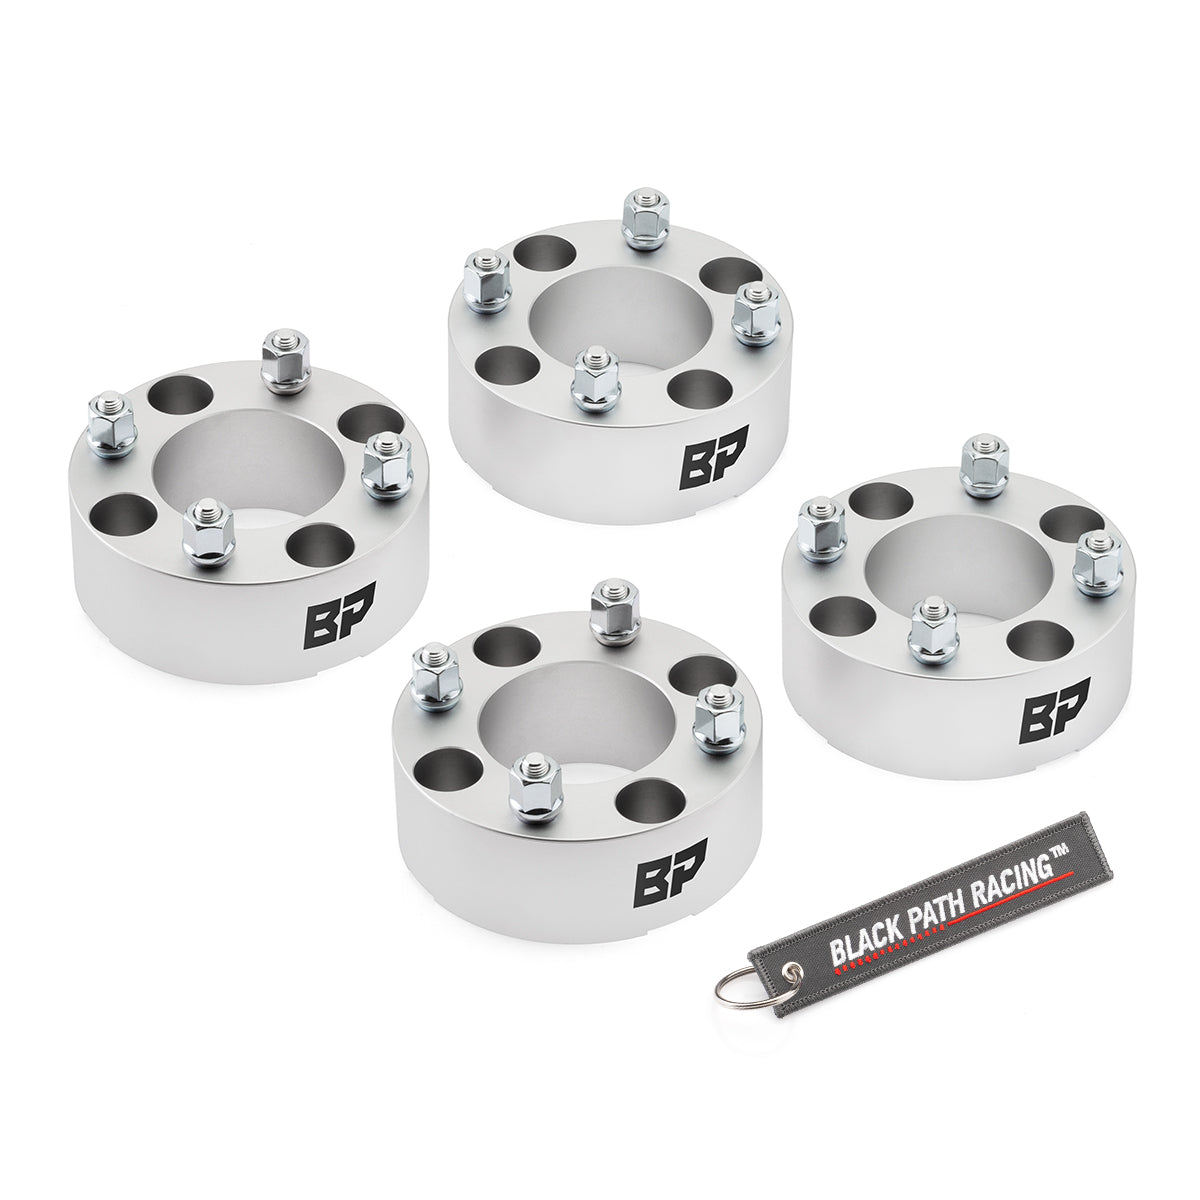 2007-2014 Yamaha Grizzly 700 Billet Wheel Spacers Kit